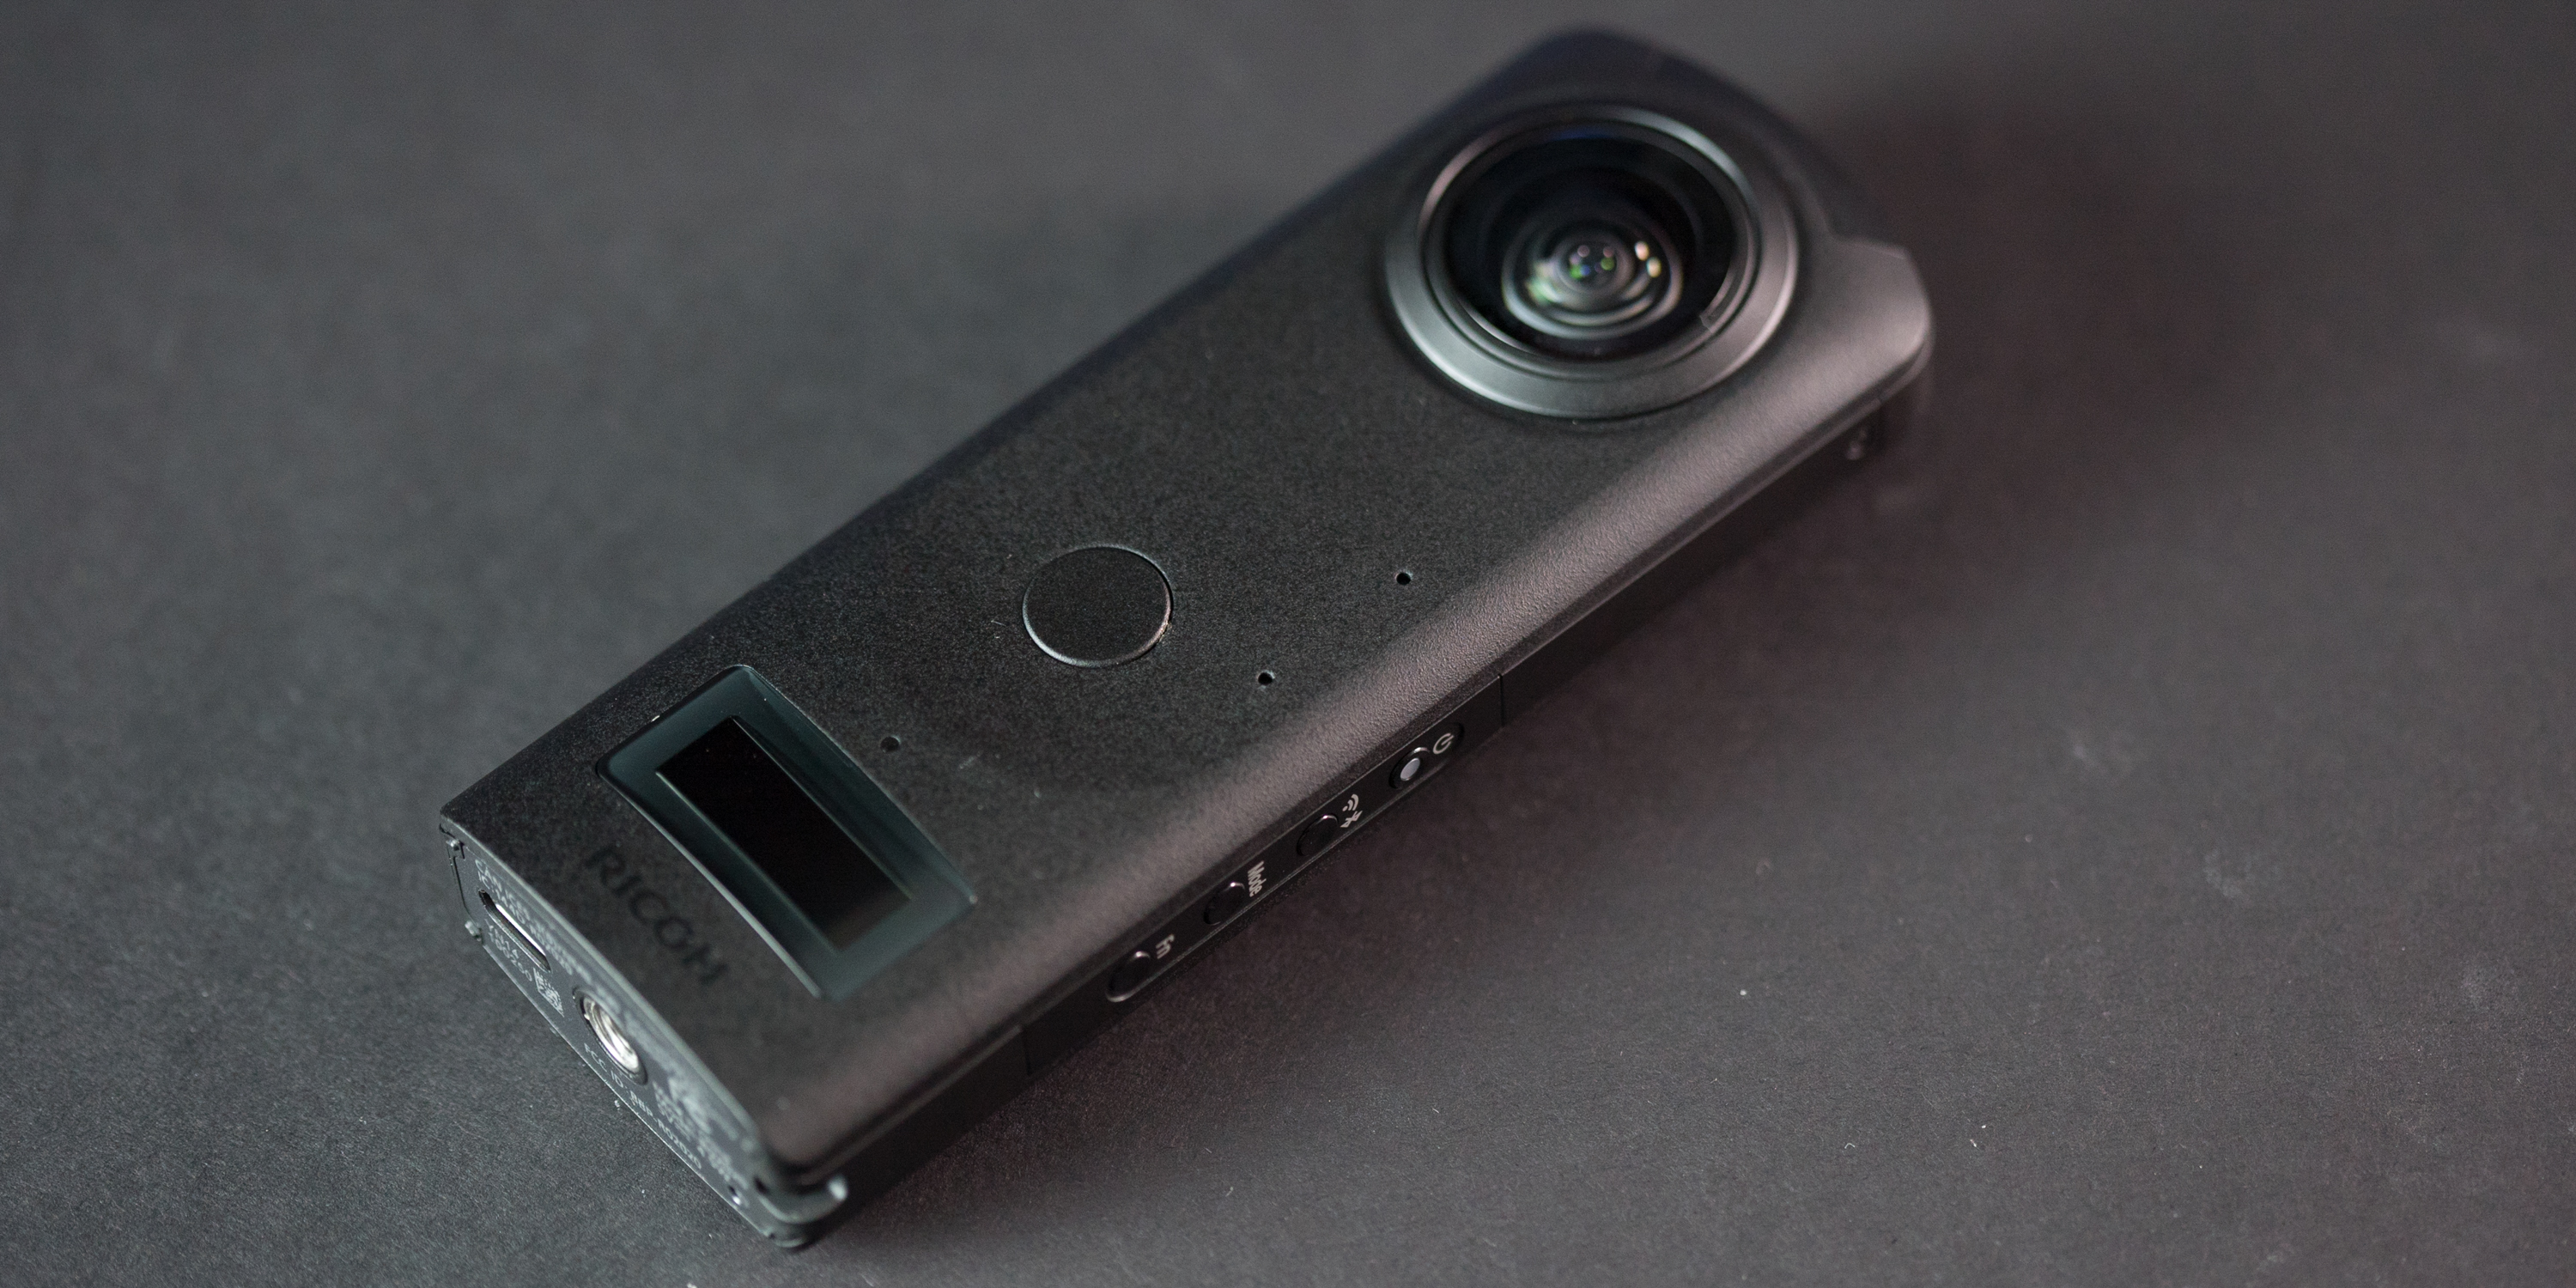 Ricoh Theta Z1 Hands-on: 360 camera with features for professionals